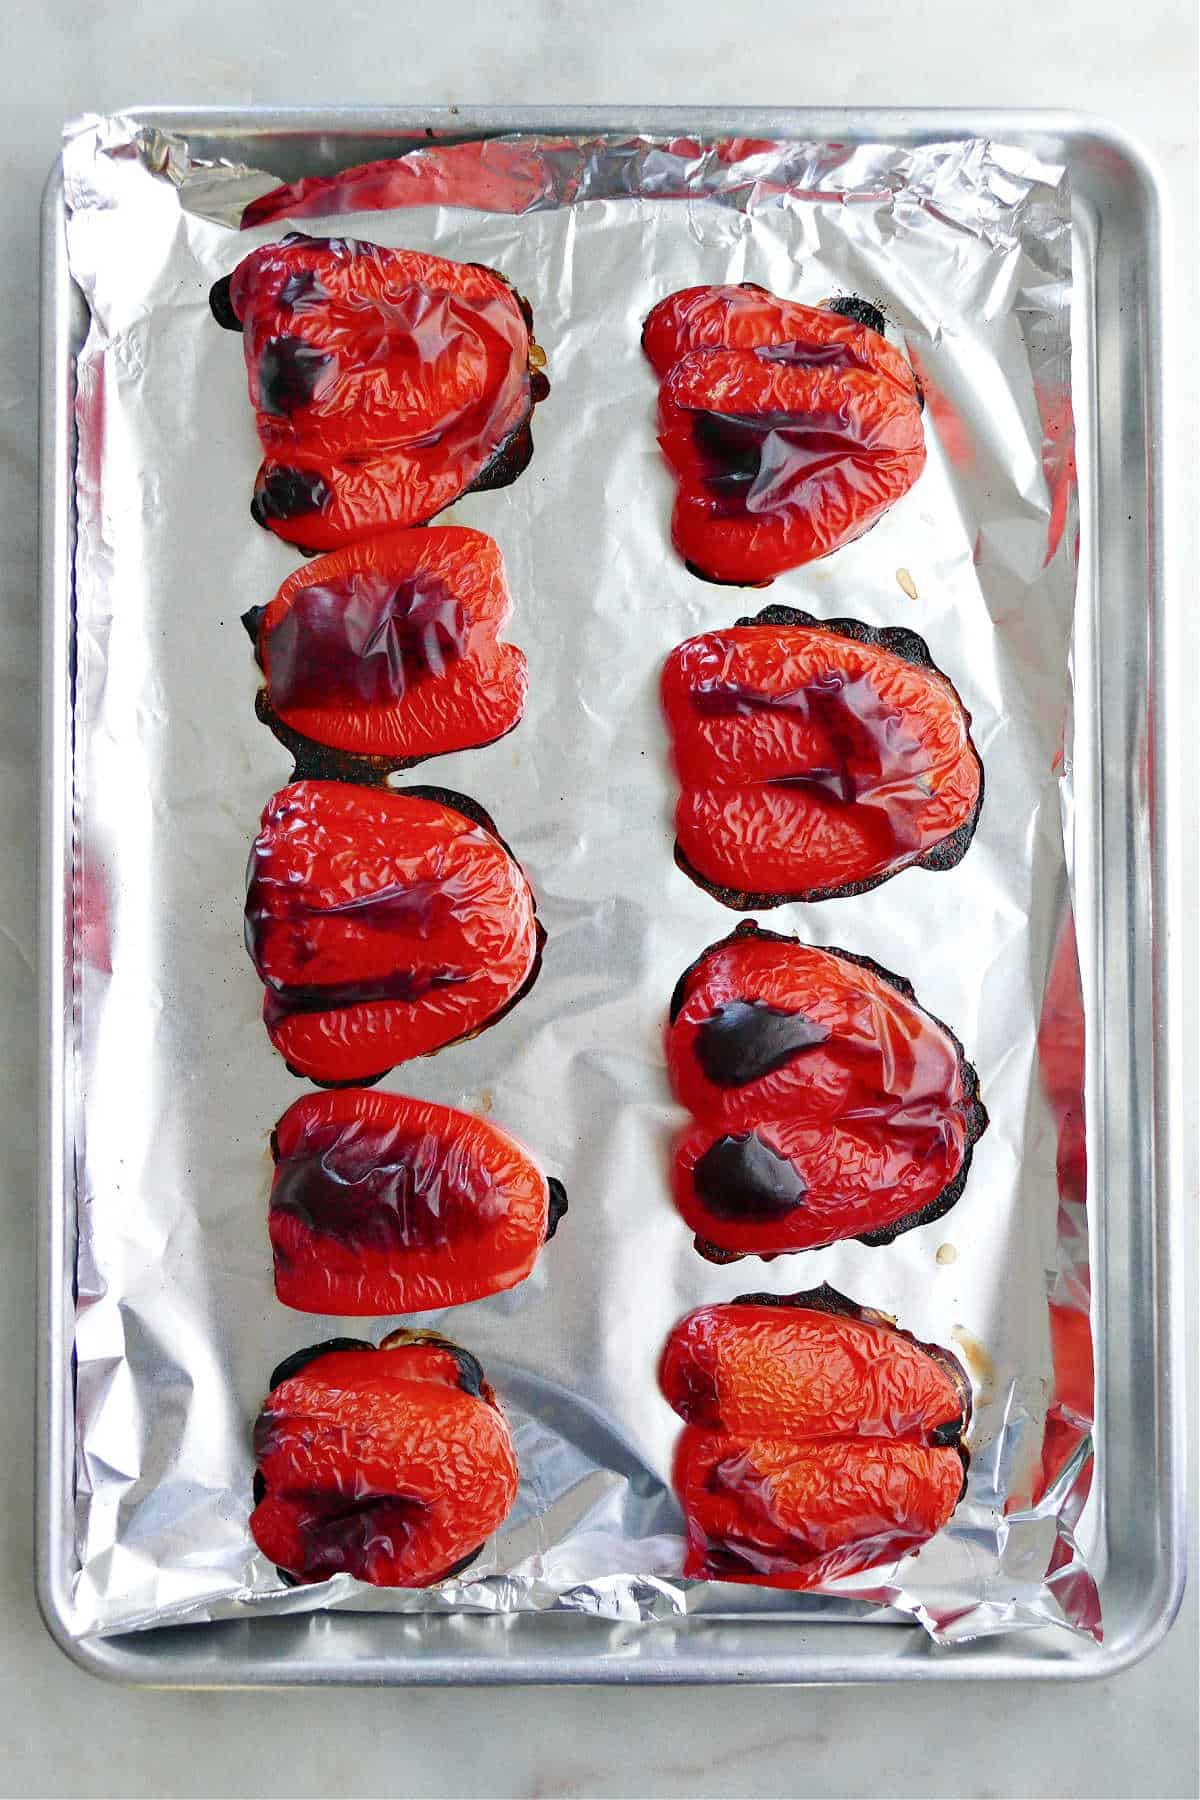 nine slices of blackened red bell peppers on a baking sheet lined with foil